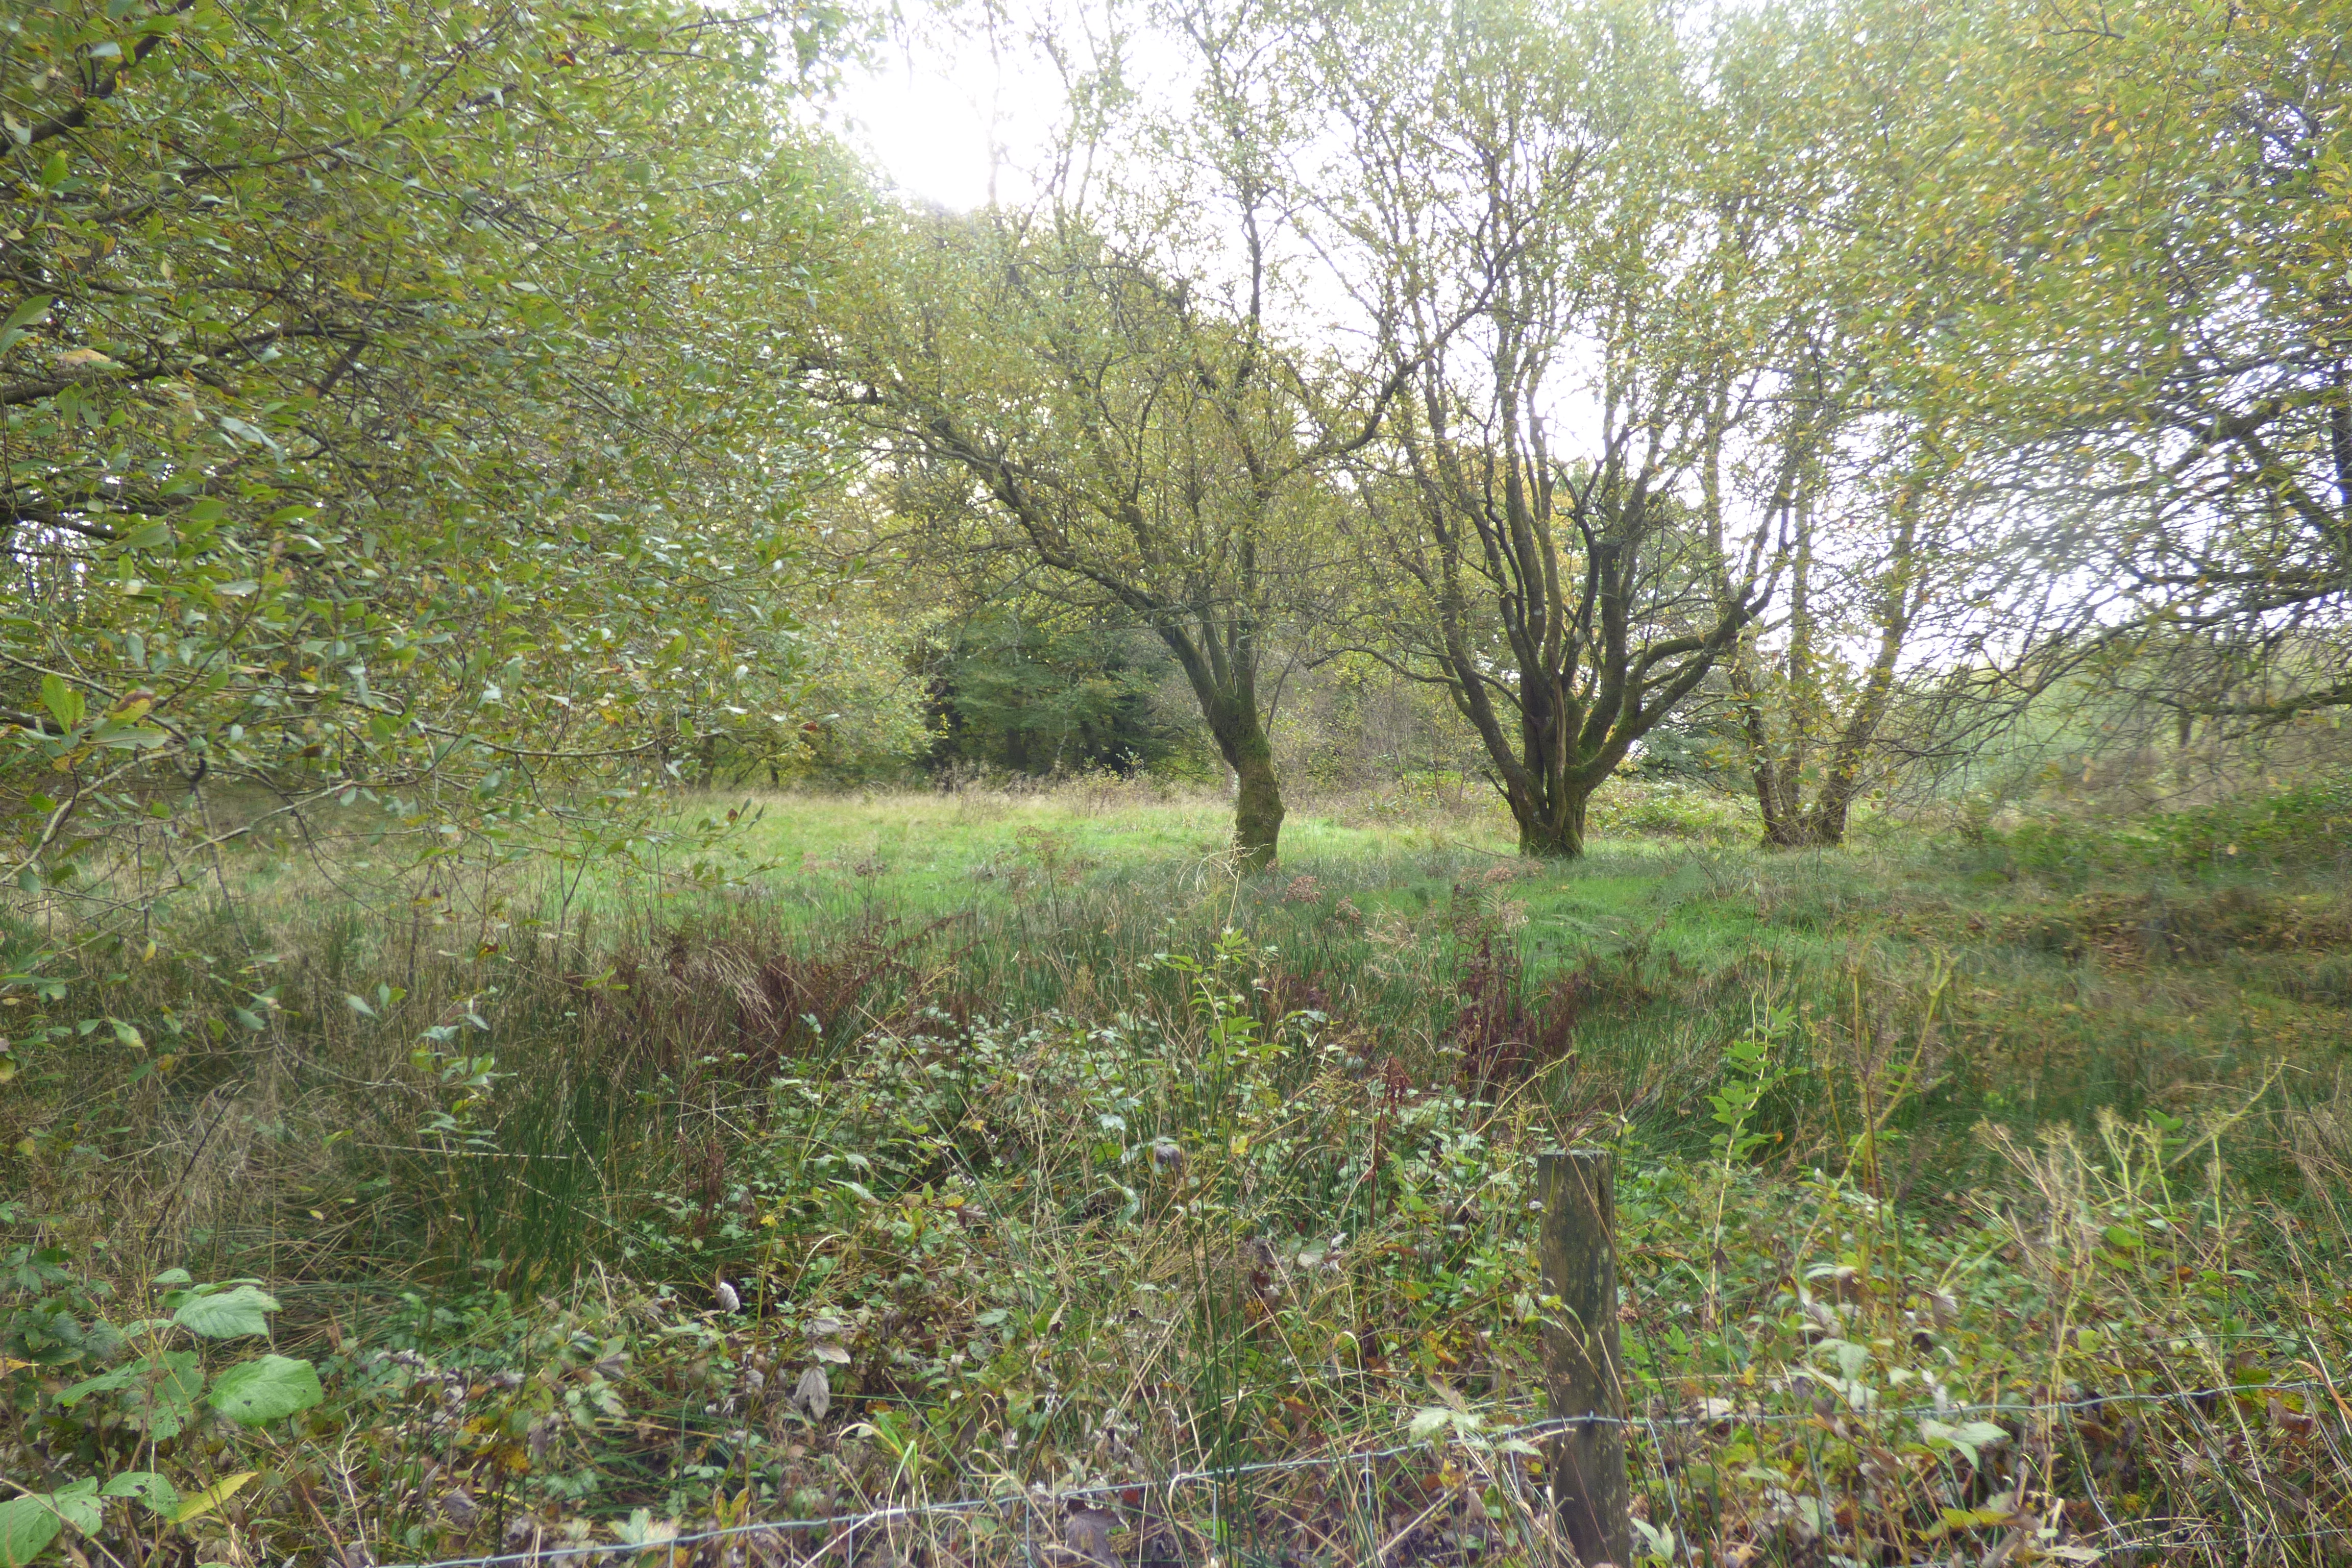 Photograph of Grazing and Woodland